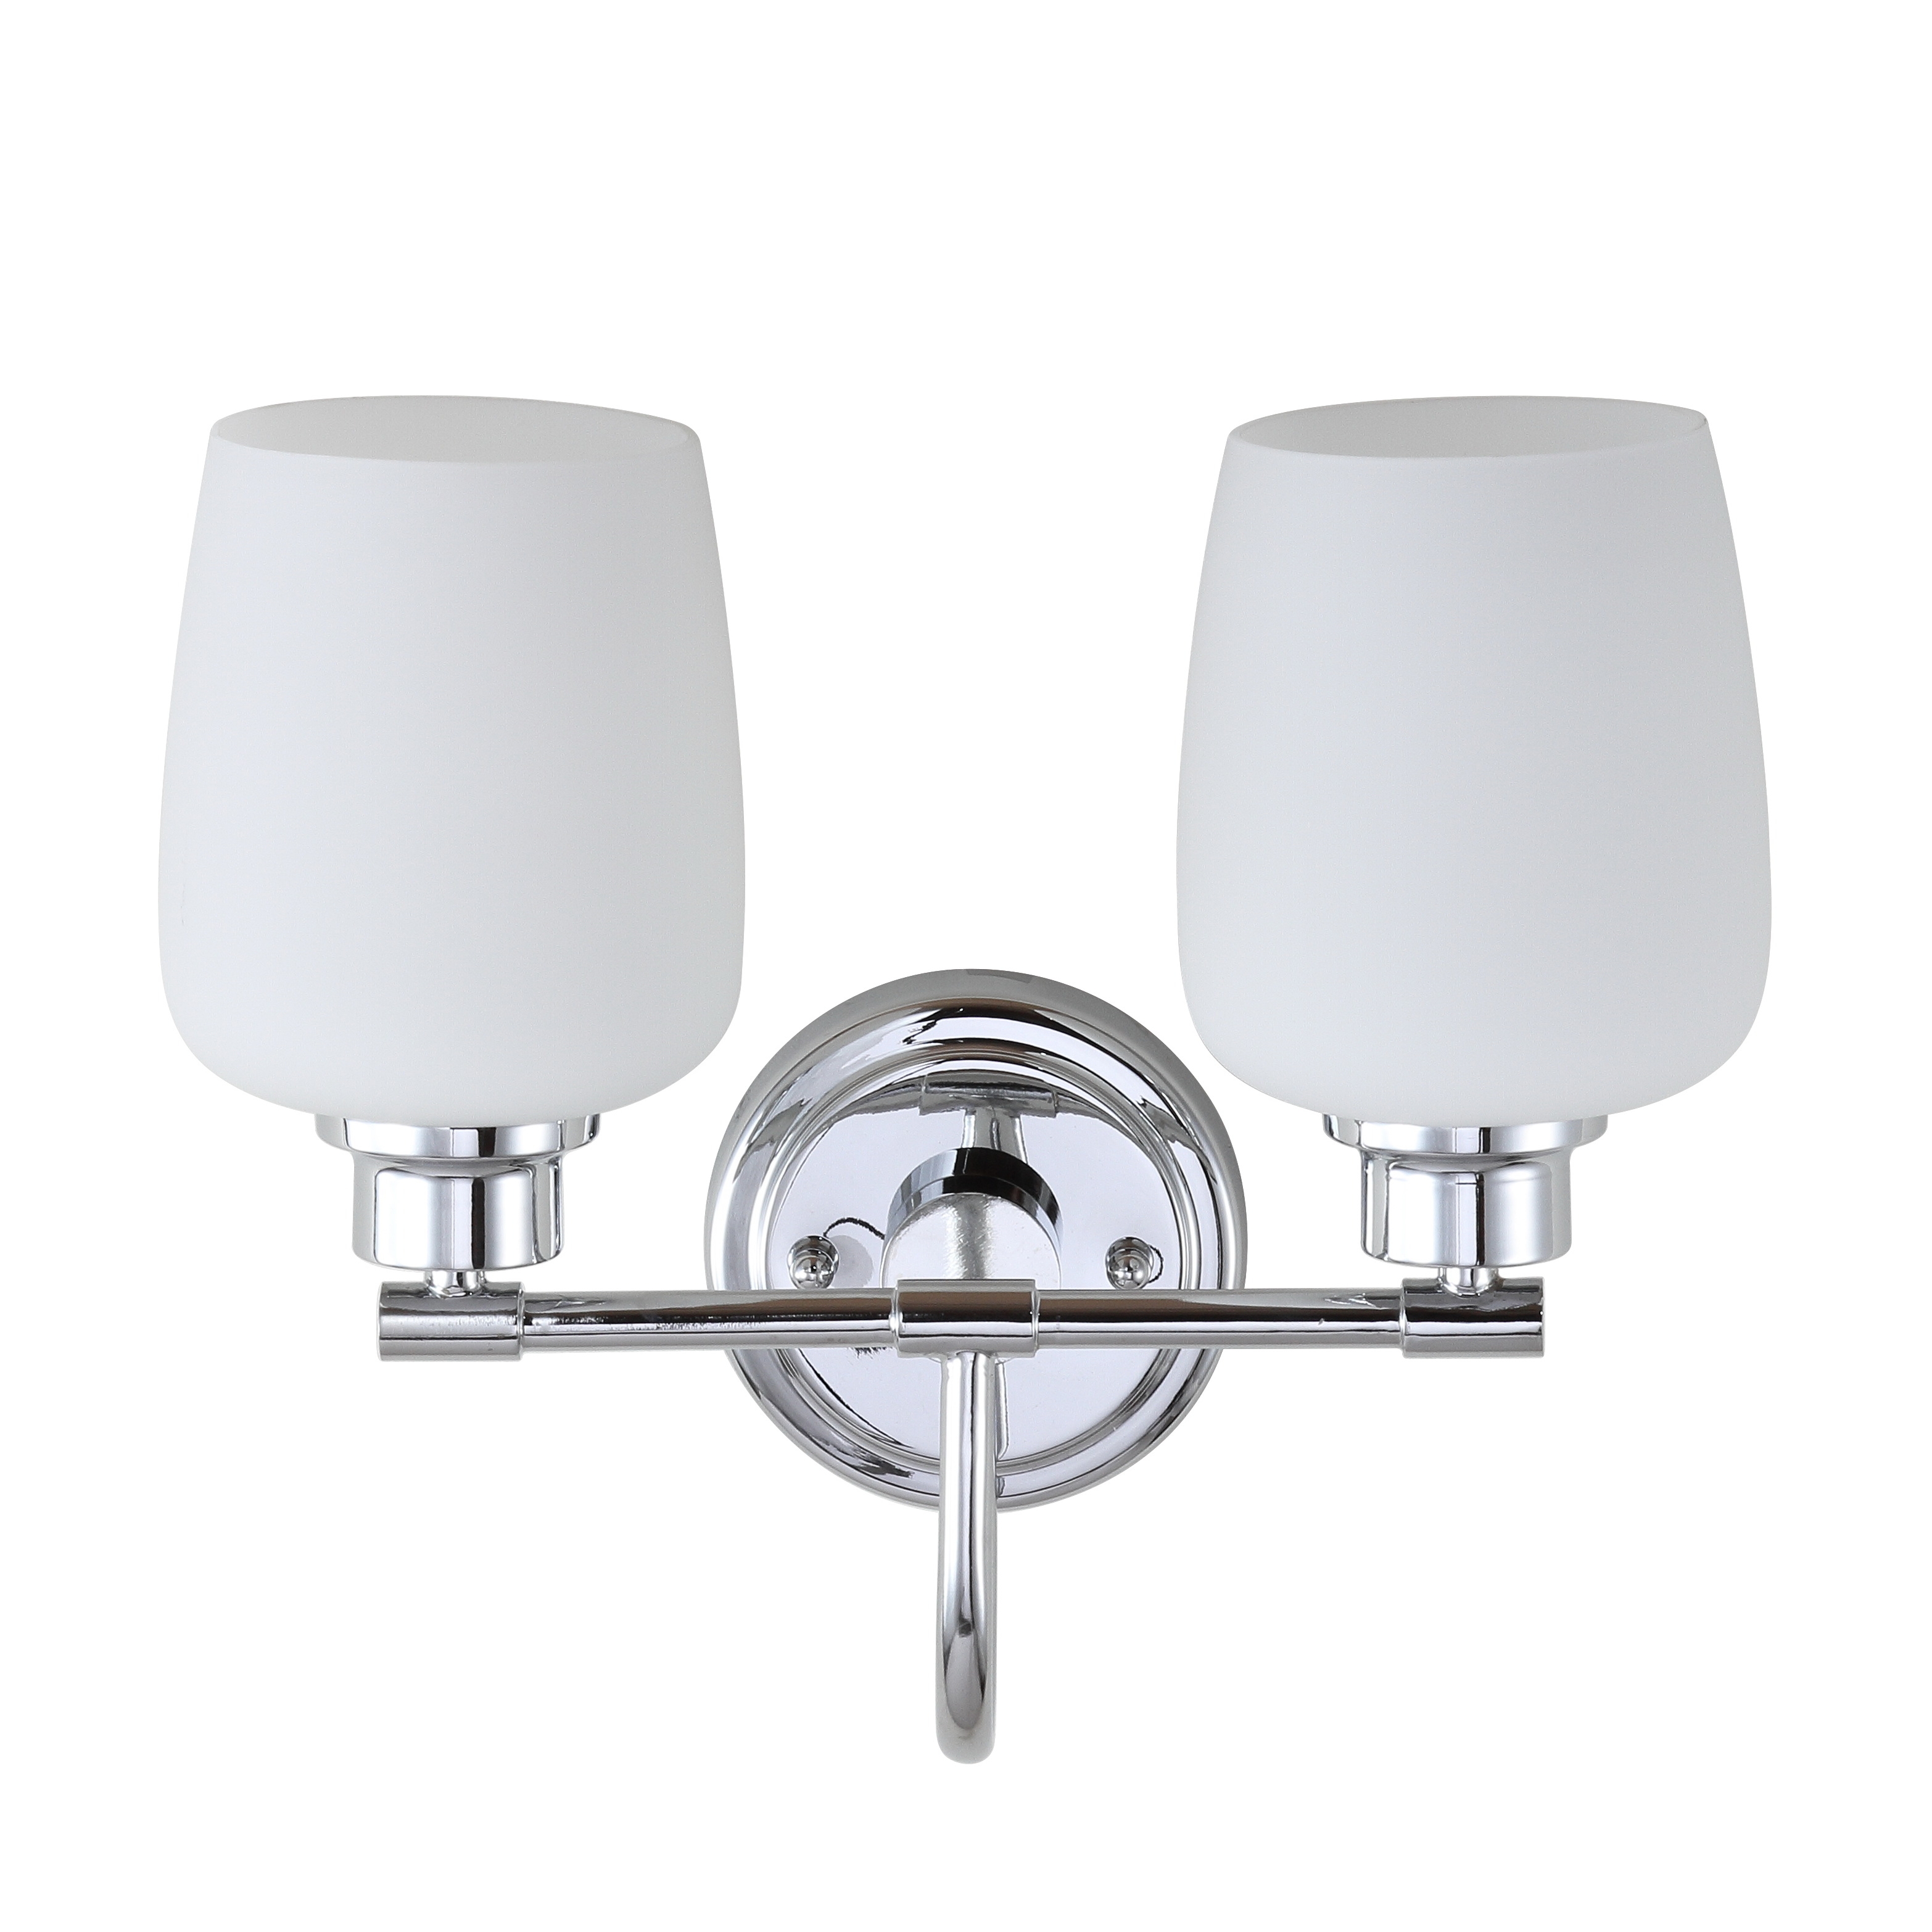 Rayden Two Light Bathroom Sconce - Iron/White Frosted Glass - Arlo Home - Image 2